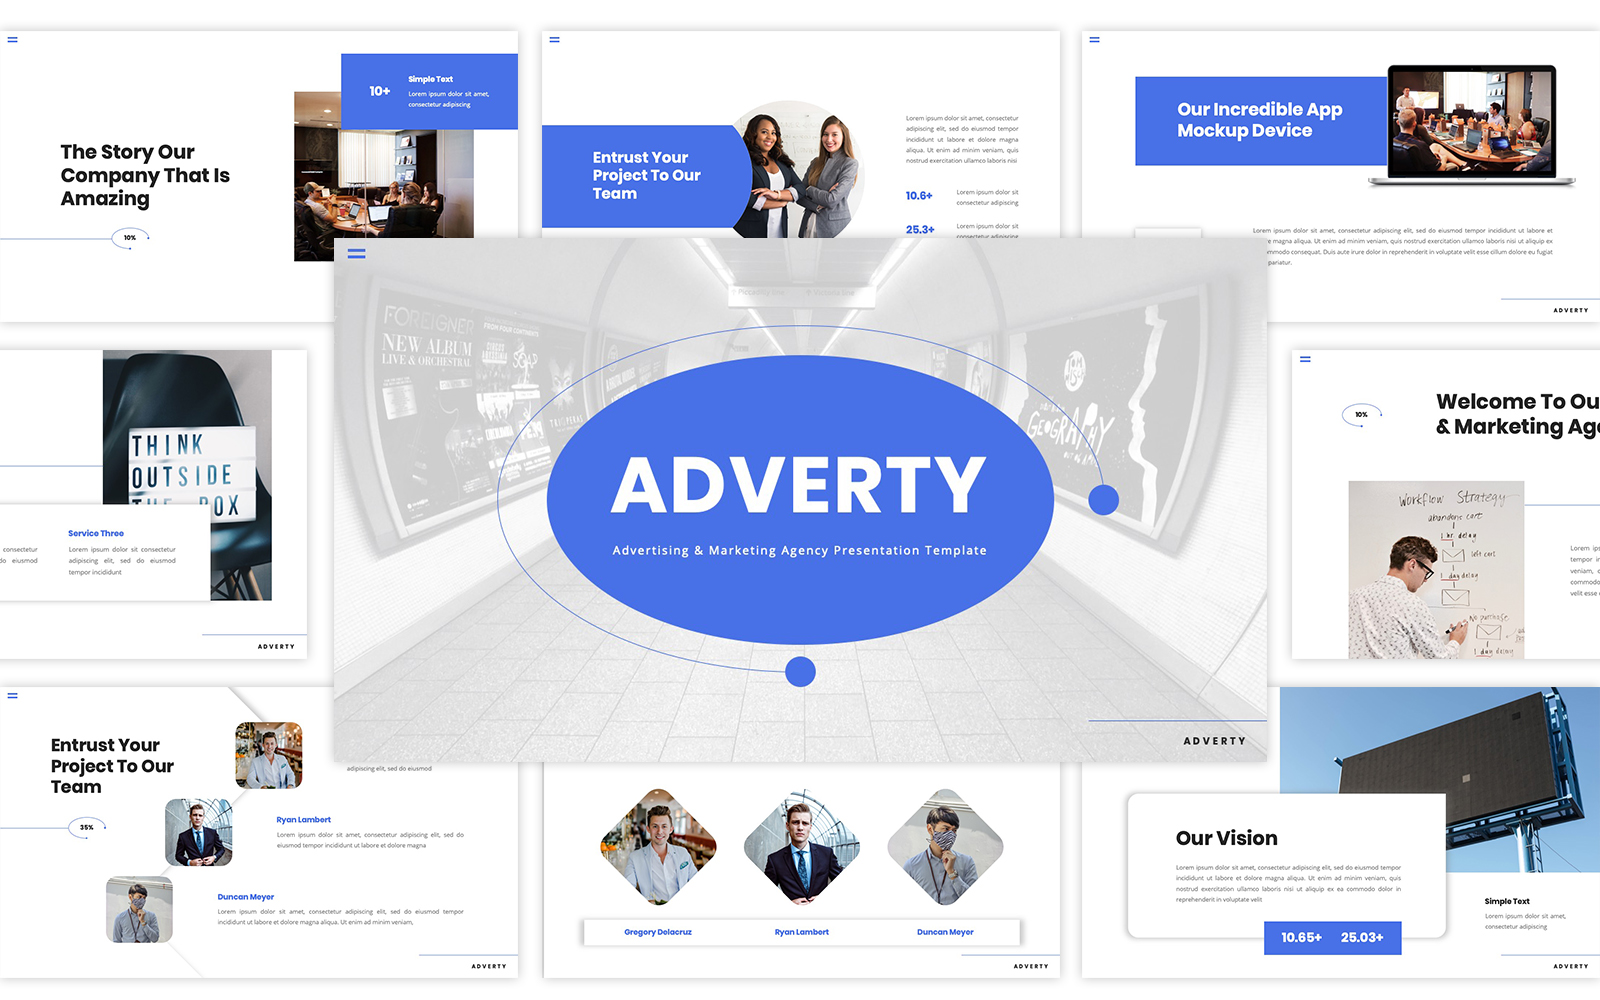 Adverty - Advertising & Marketing Agency PowerPoint template